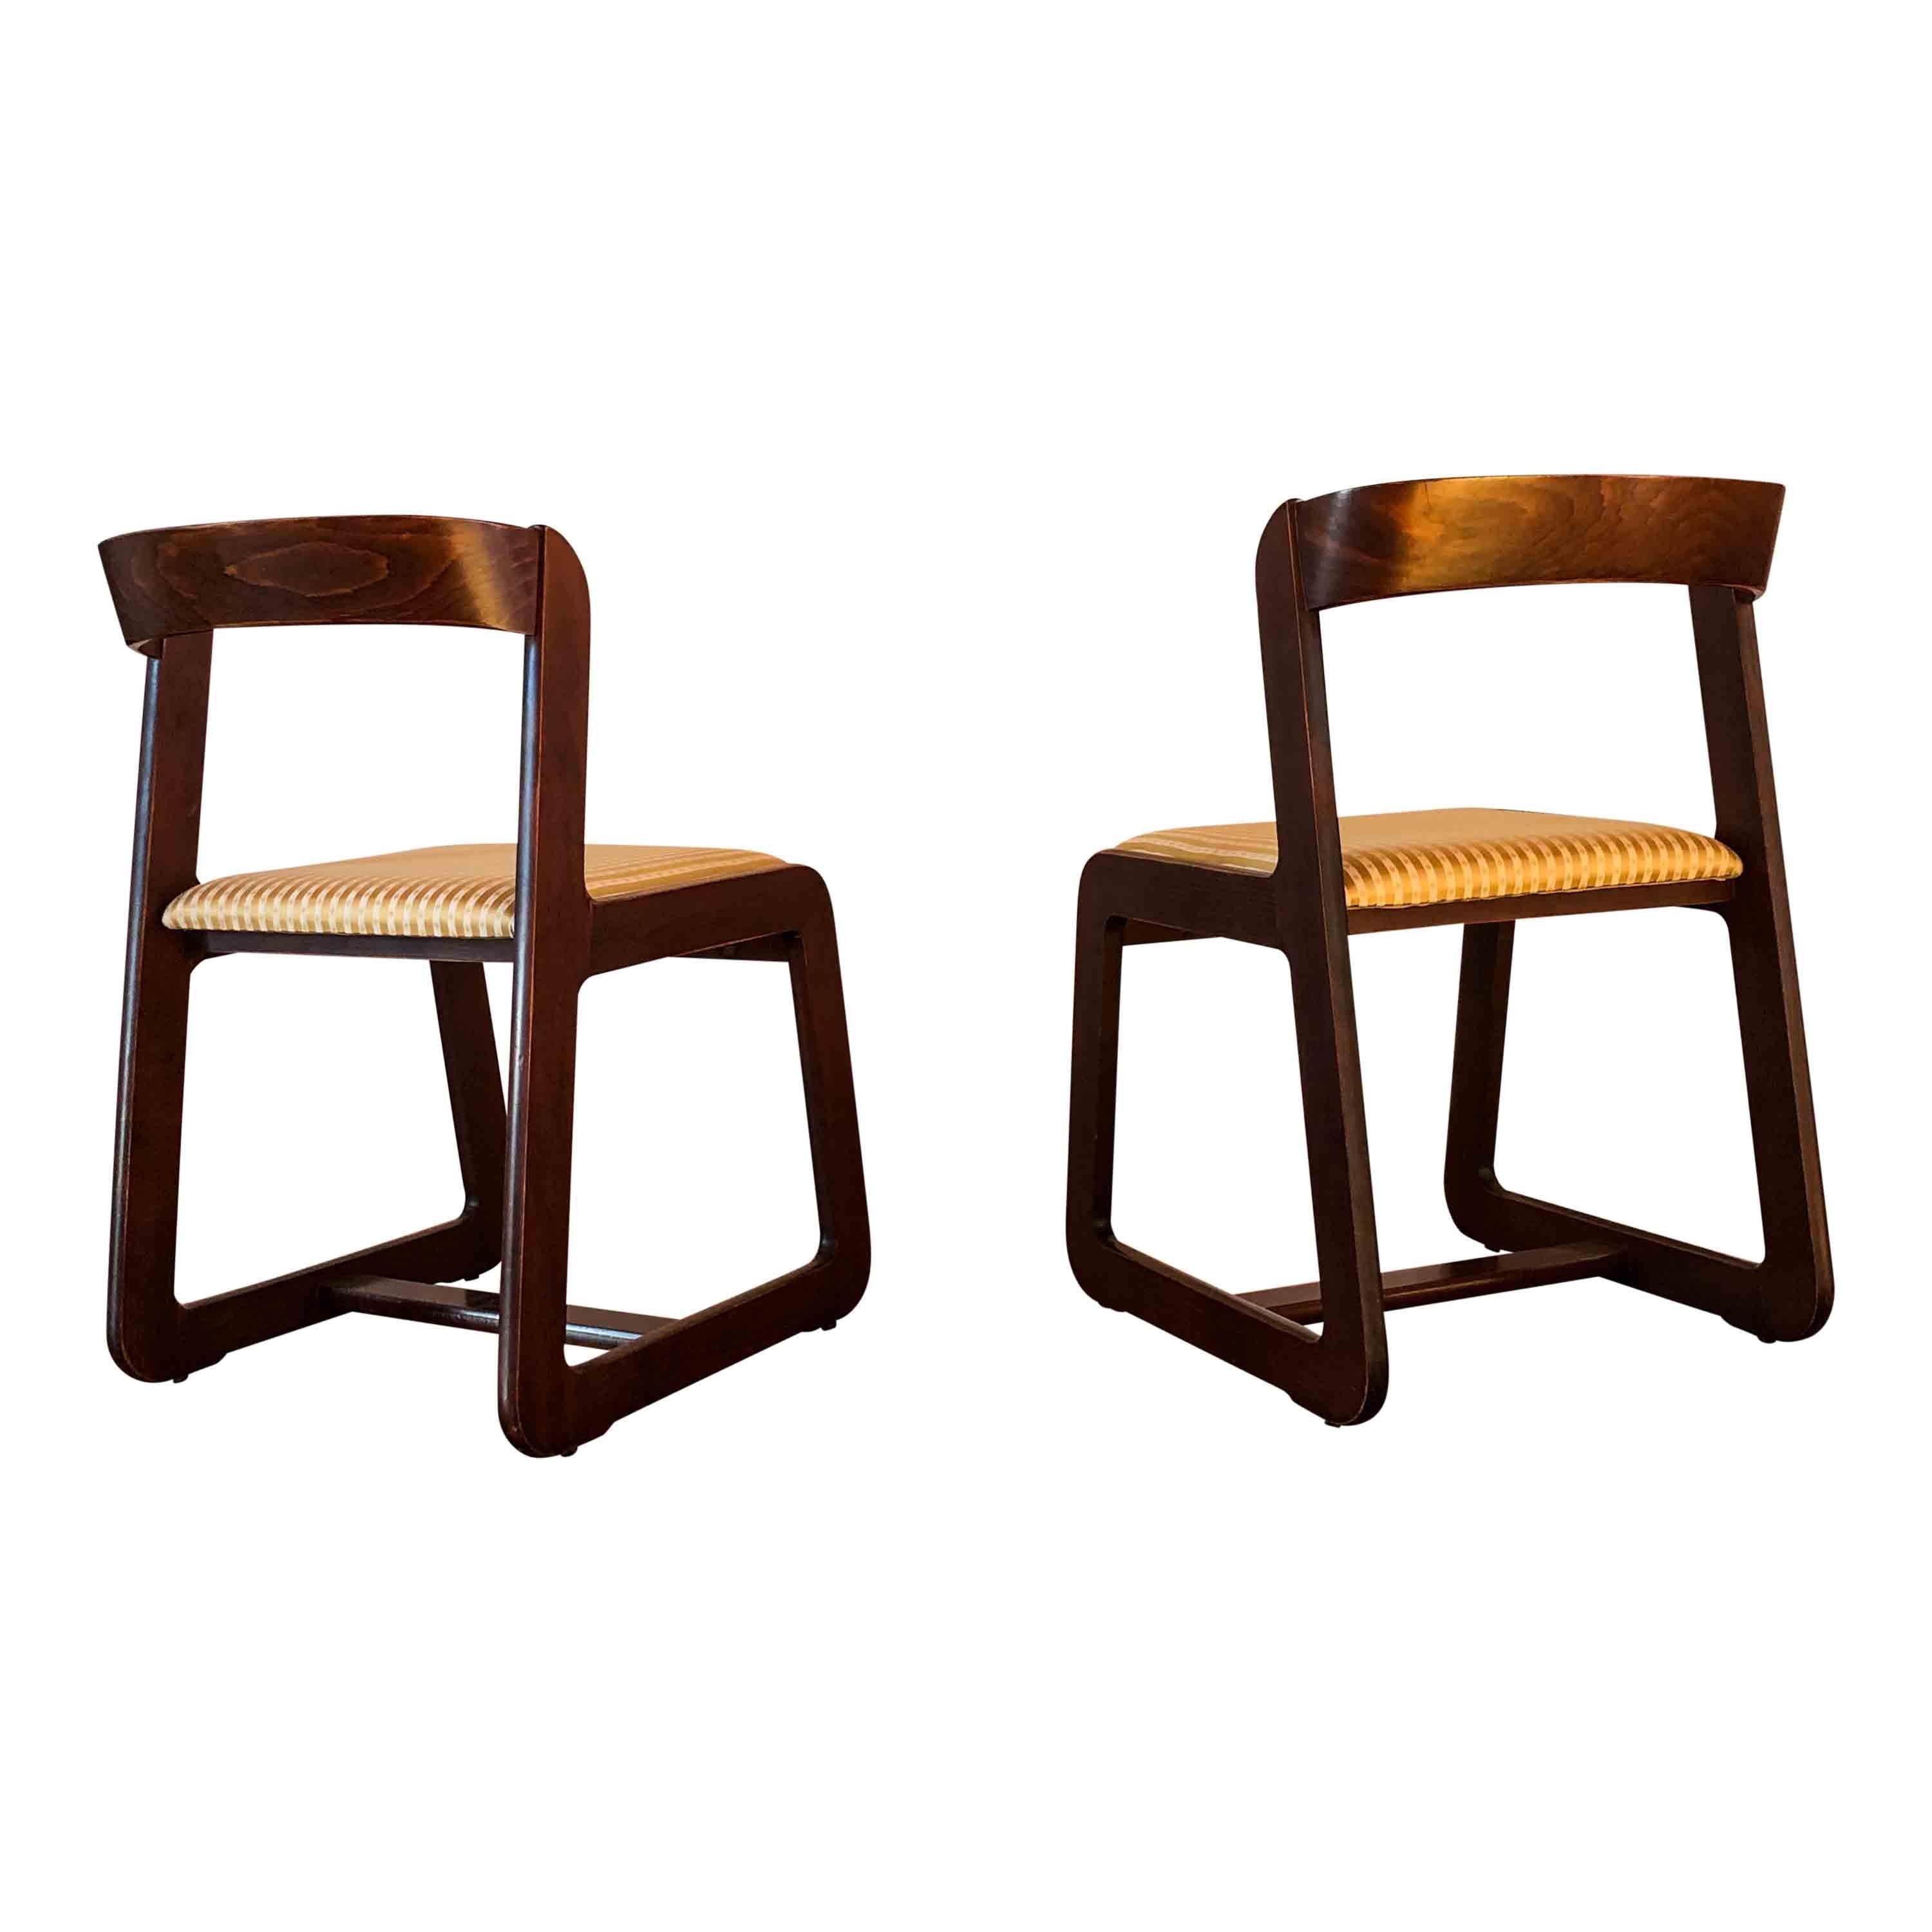 Midcentury Beech Dining Chairs by Willy Rizzo for Mario Sabot, 70s, Set of 6 For Sale 1